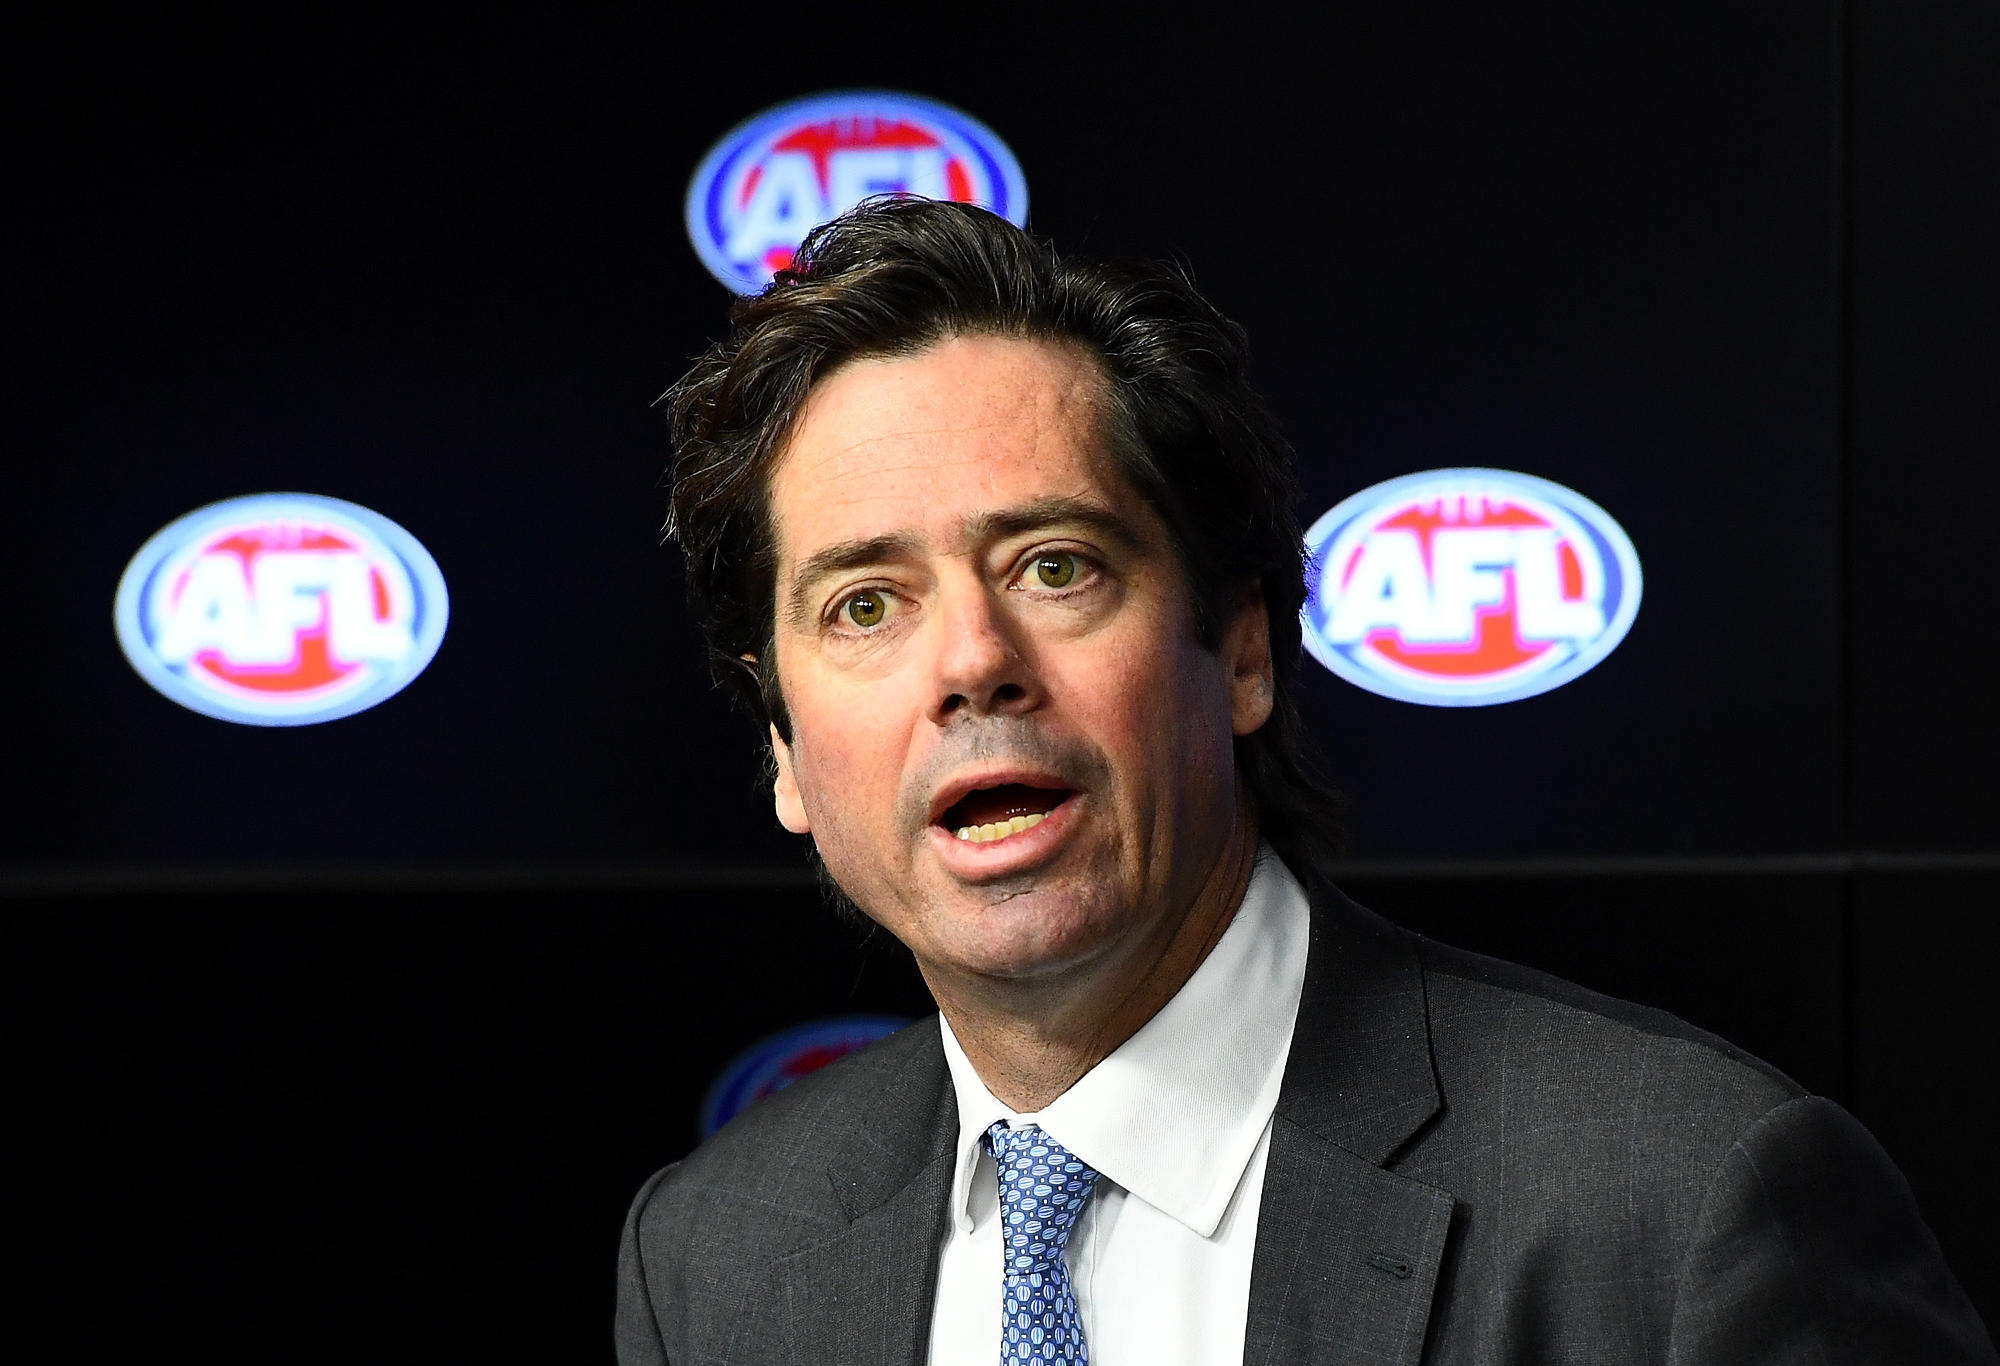 AFL Chief Executive Officer Gillon McLachlan speaks to the media